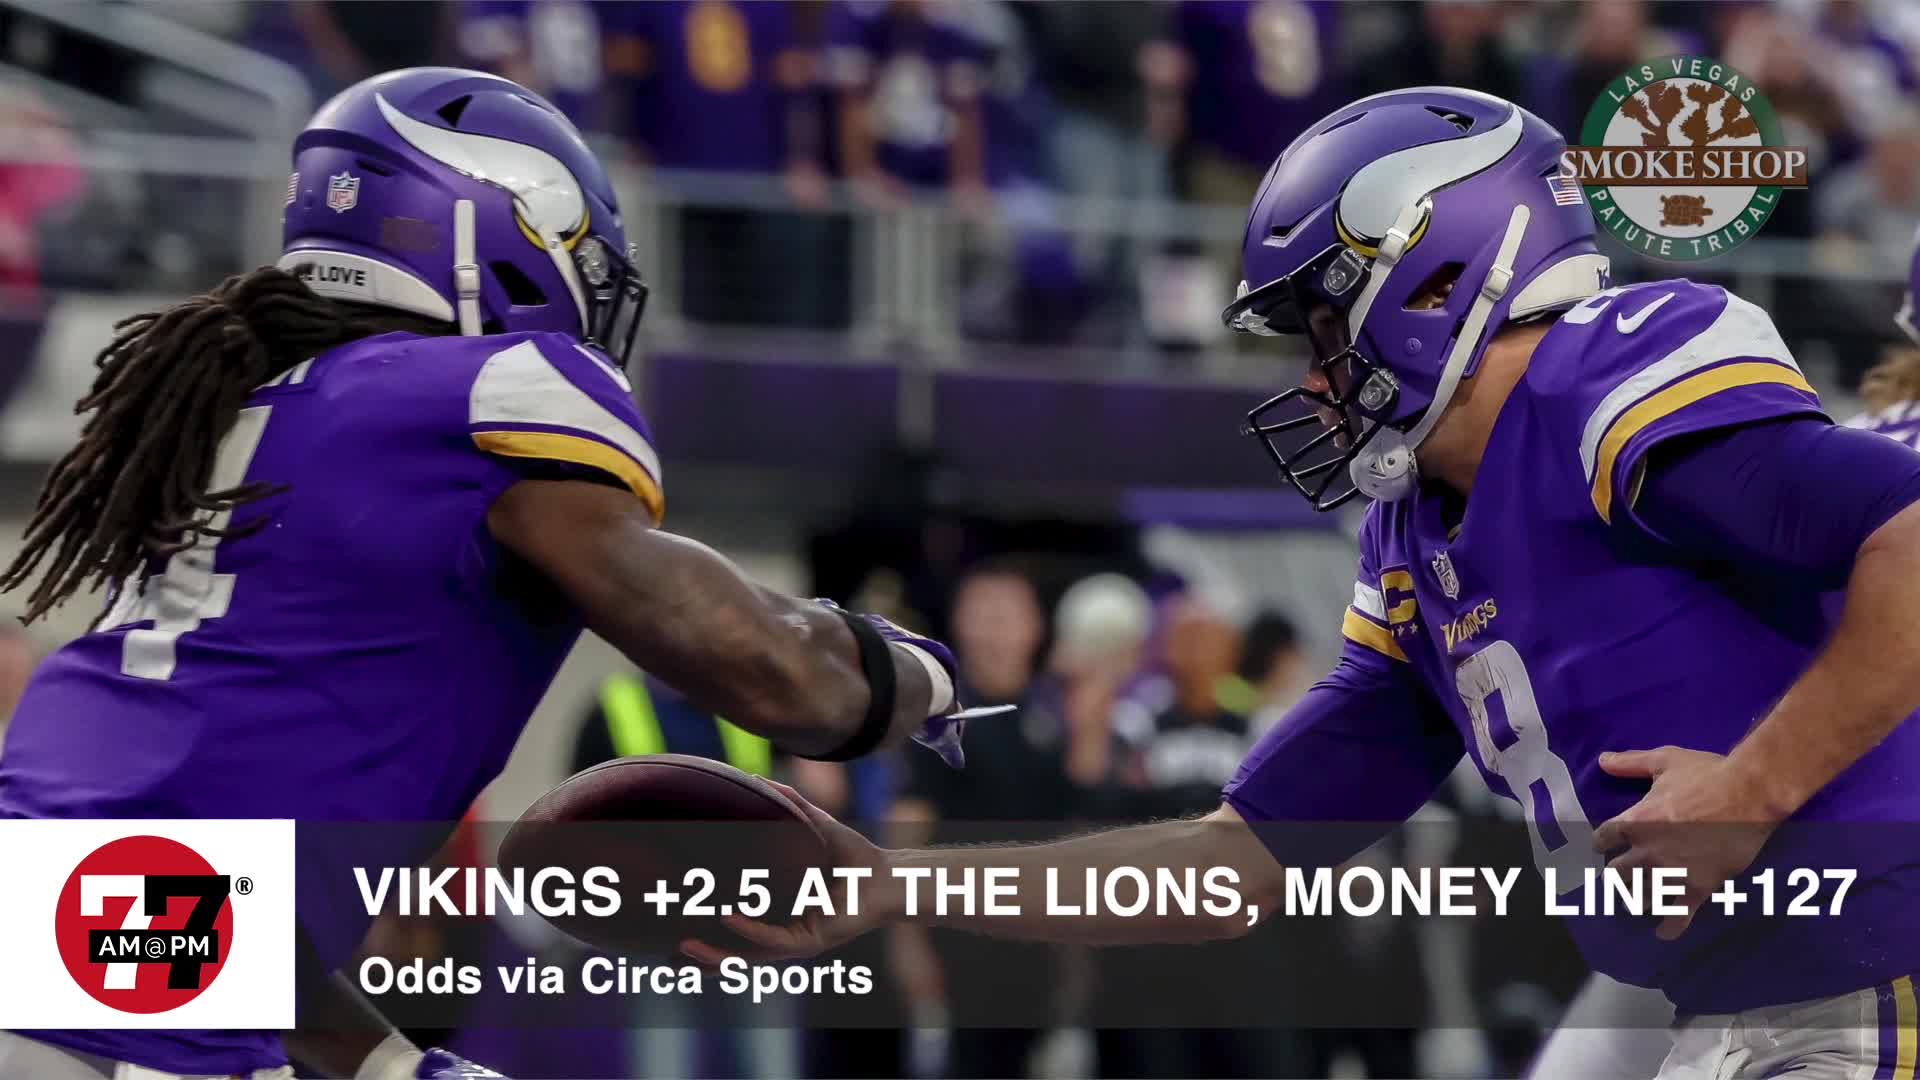 Vikings +2.5 at the Lions